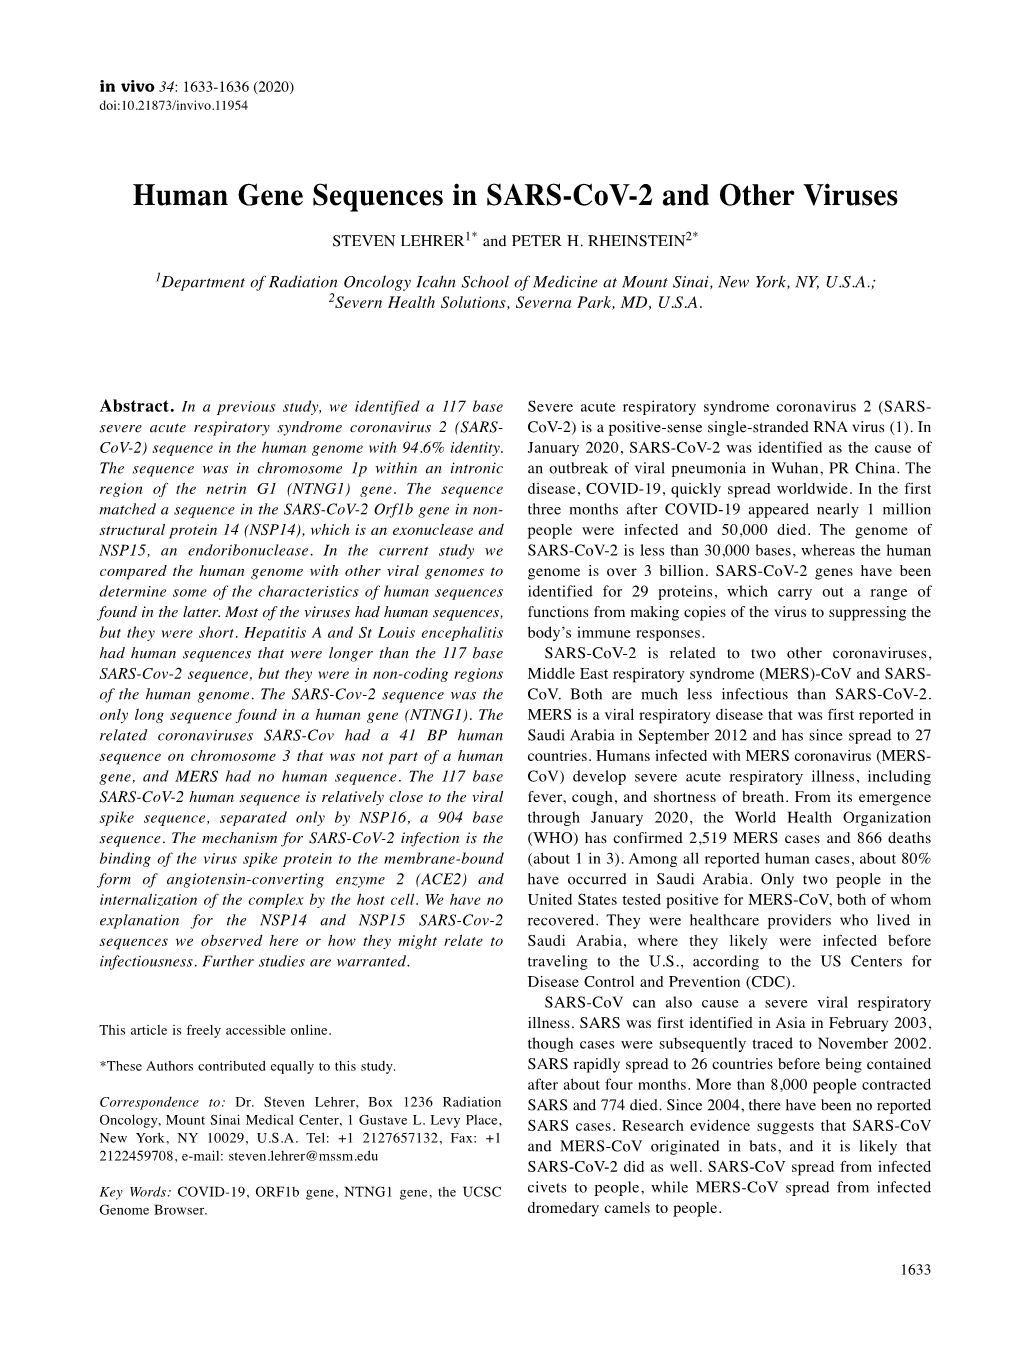 Human Gene Sequences in SARS-Cov-2 and Other Viruses STEVEN LEHRER 1* and PETER H